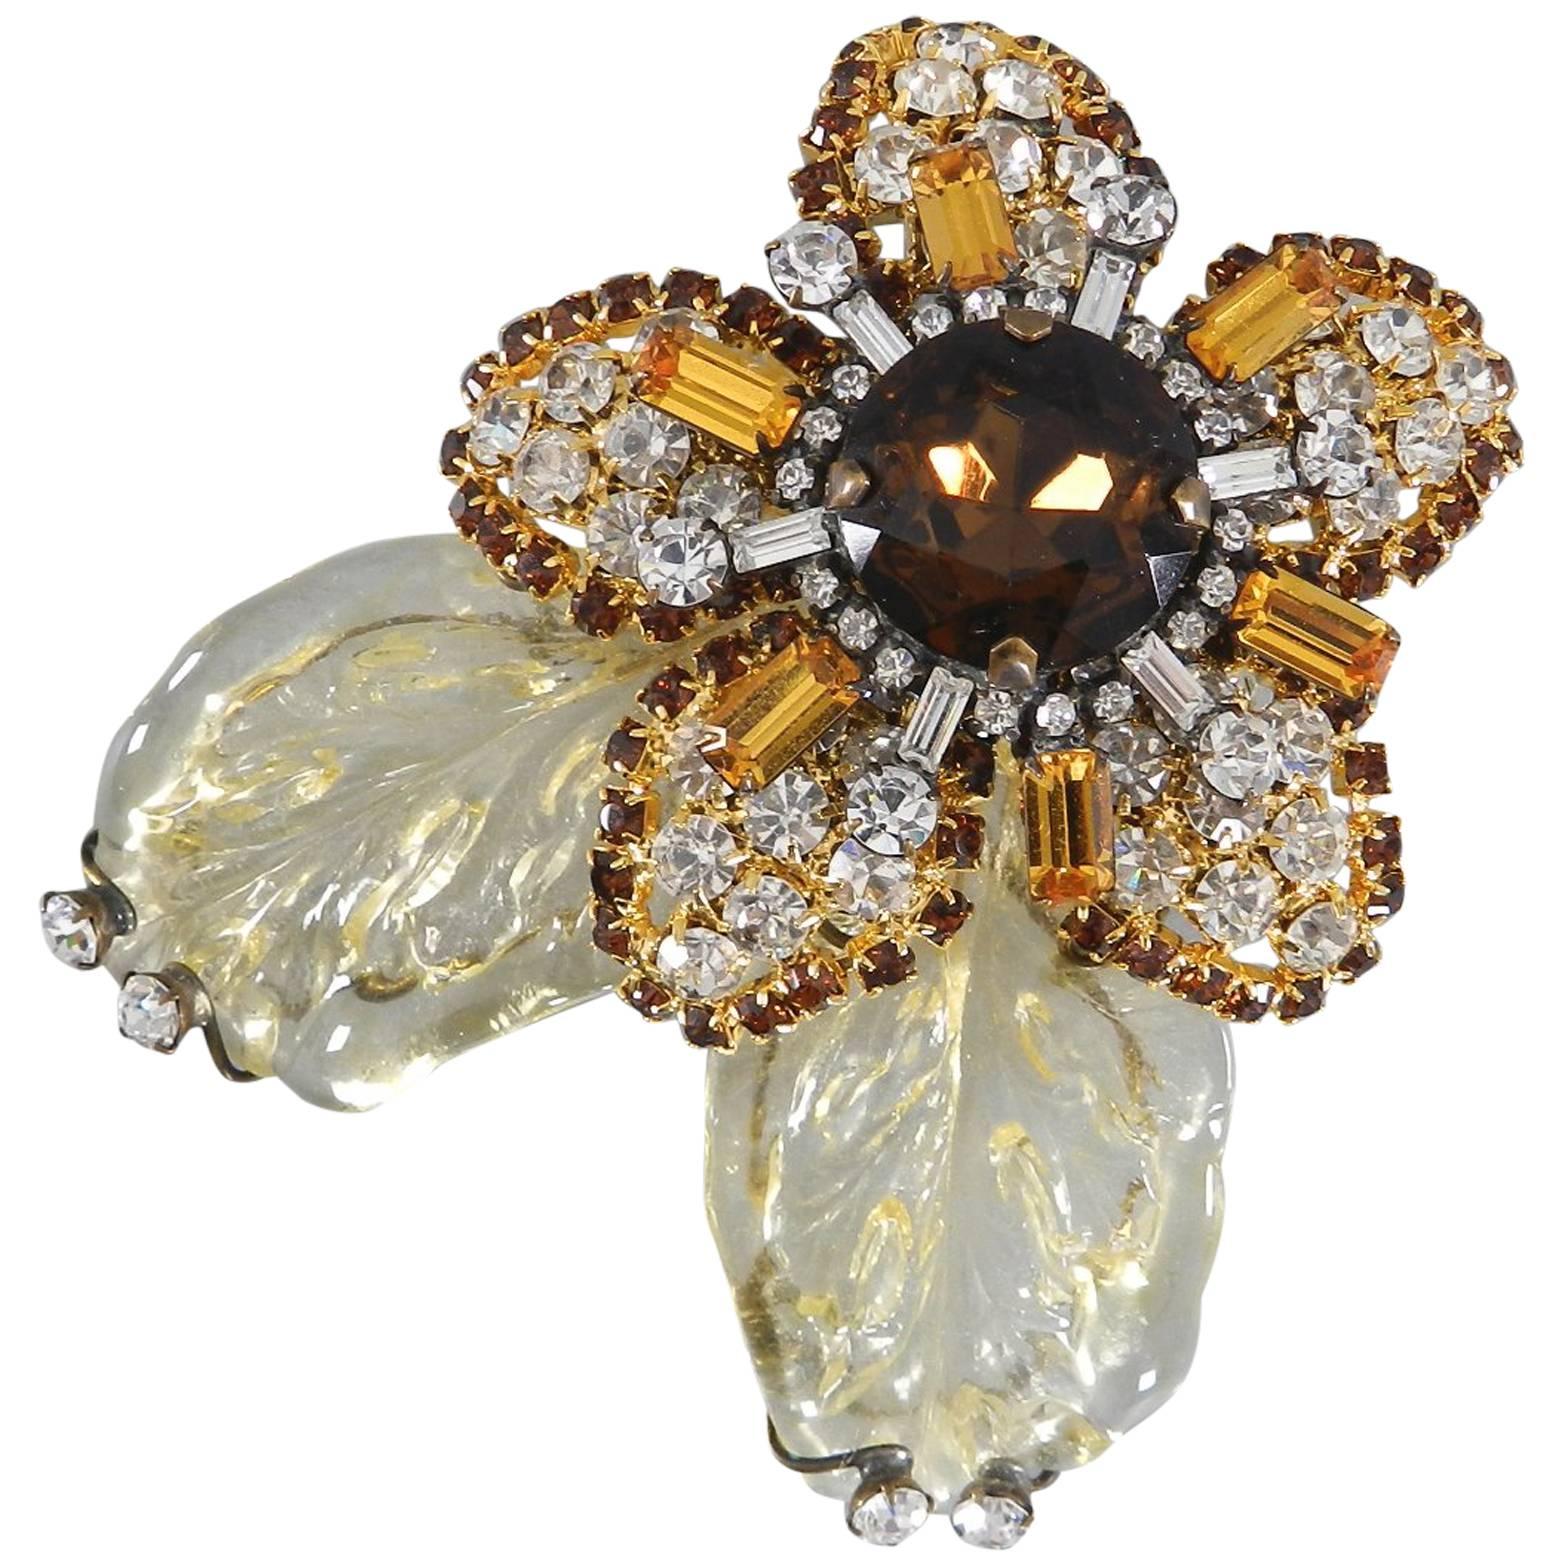 Lawrence VRBA Large Flower Brooch with Yellow Amber Glass rhinestones